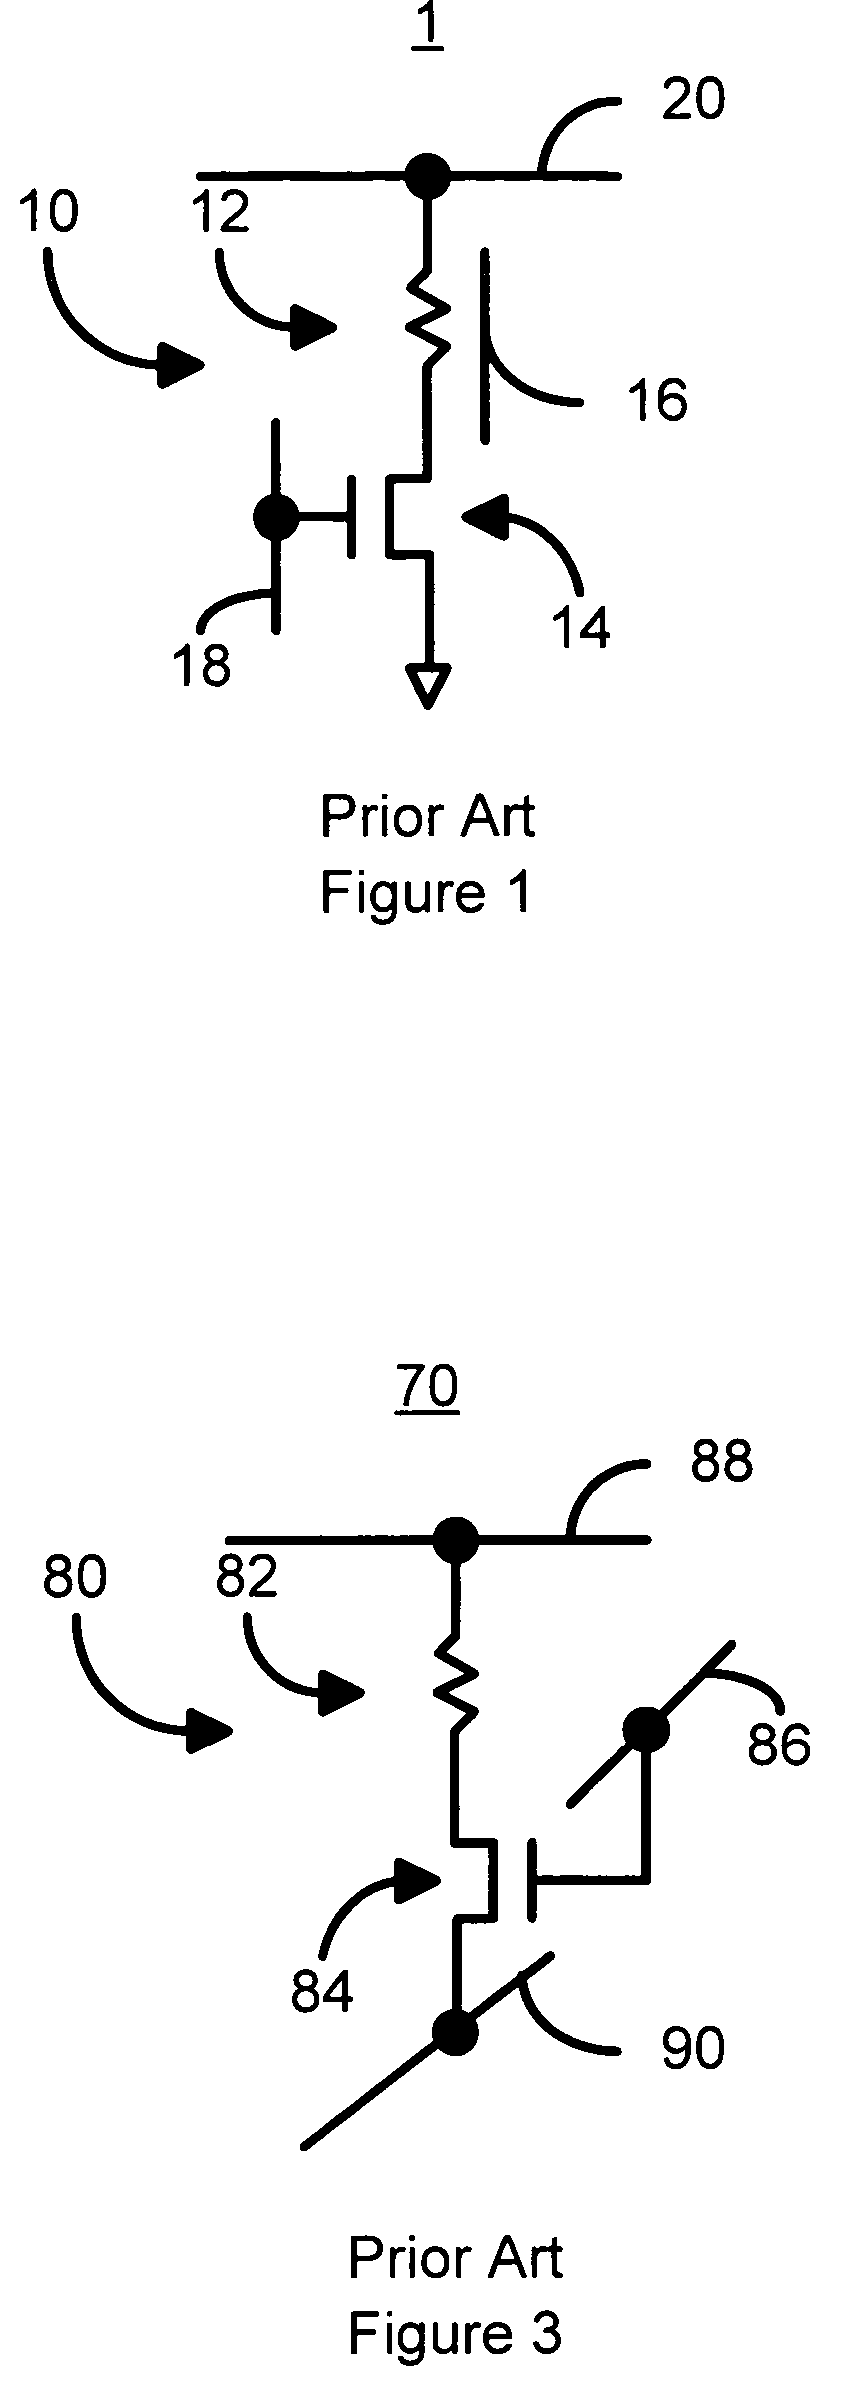 Current driven switched magnetic storage cells having improved read and write margins and magnetic memories using such cells